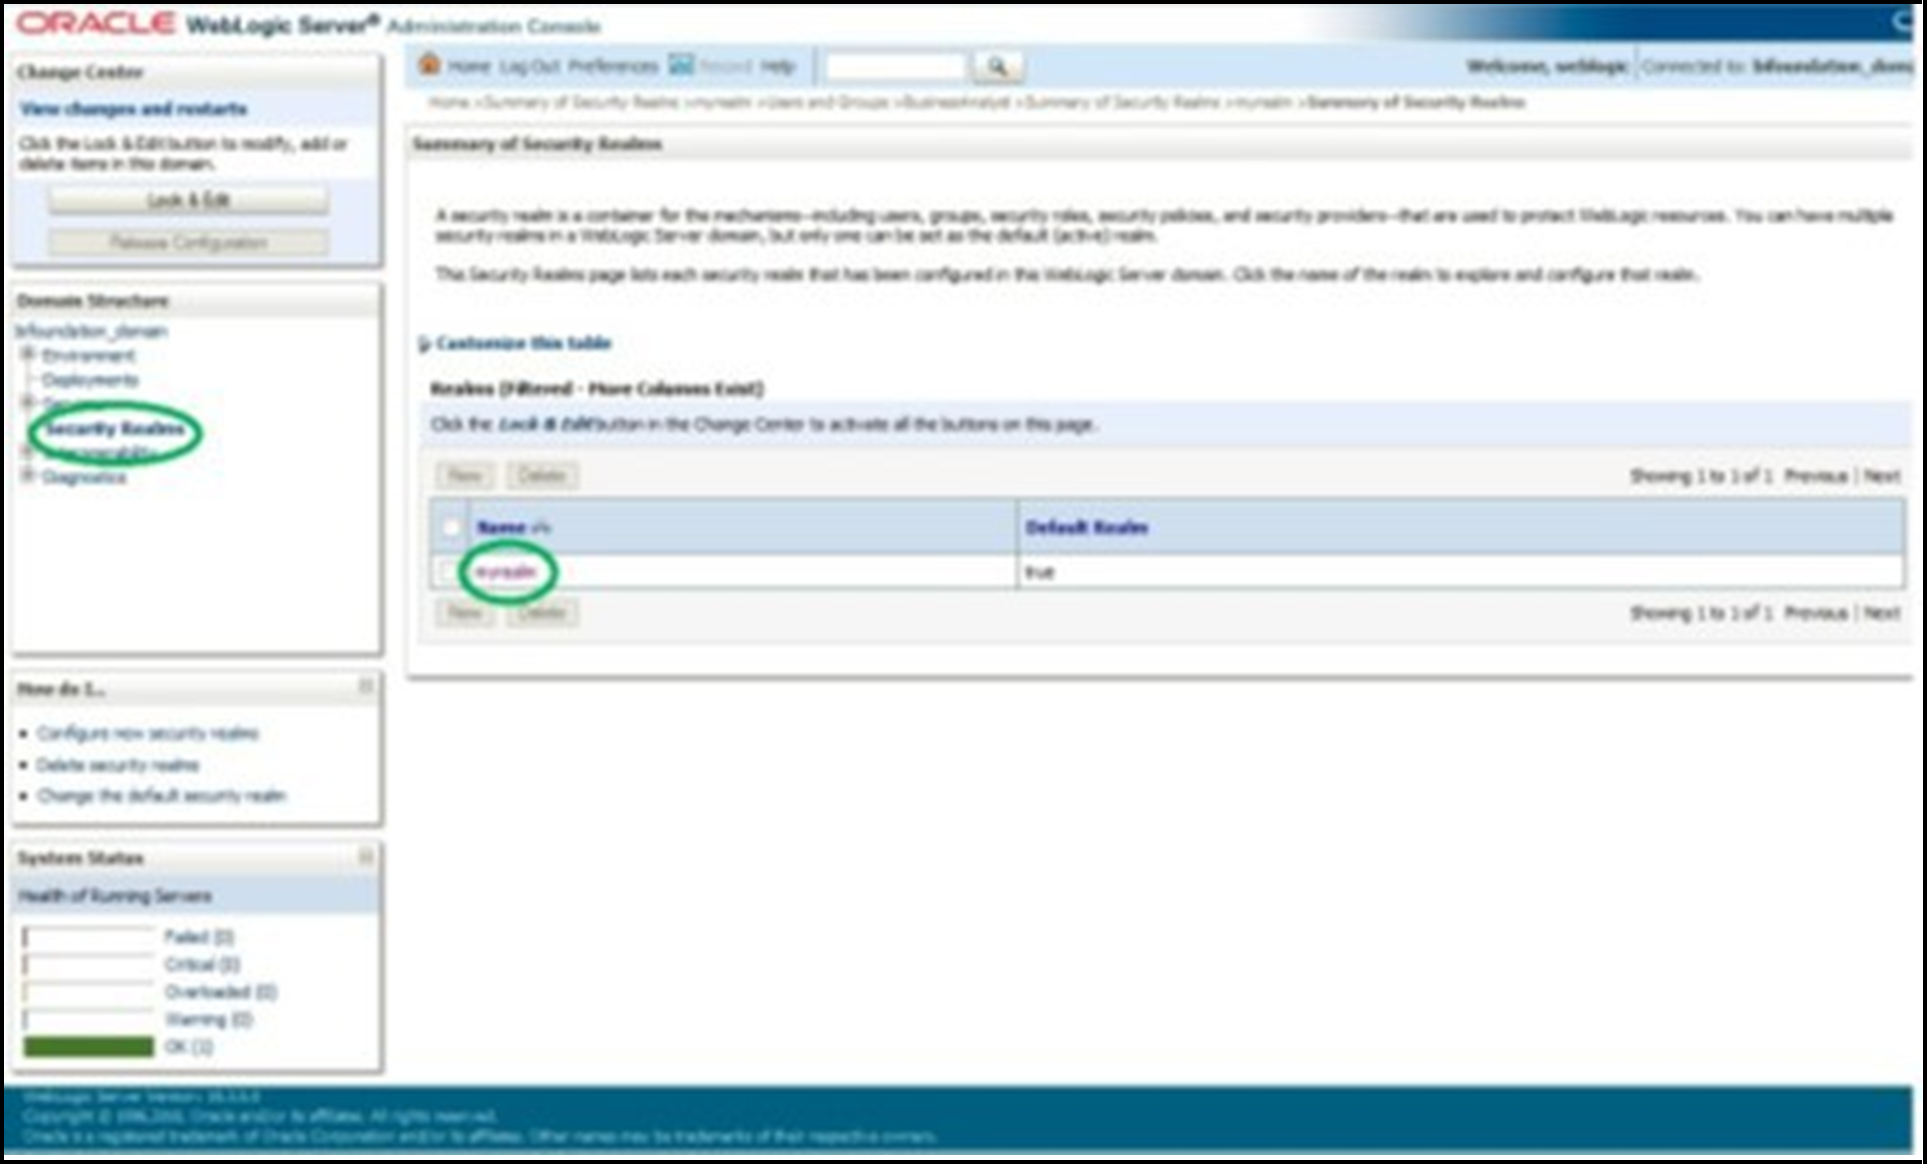 The WebLogic Administration Console allows you to create the OBIEE roles.